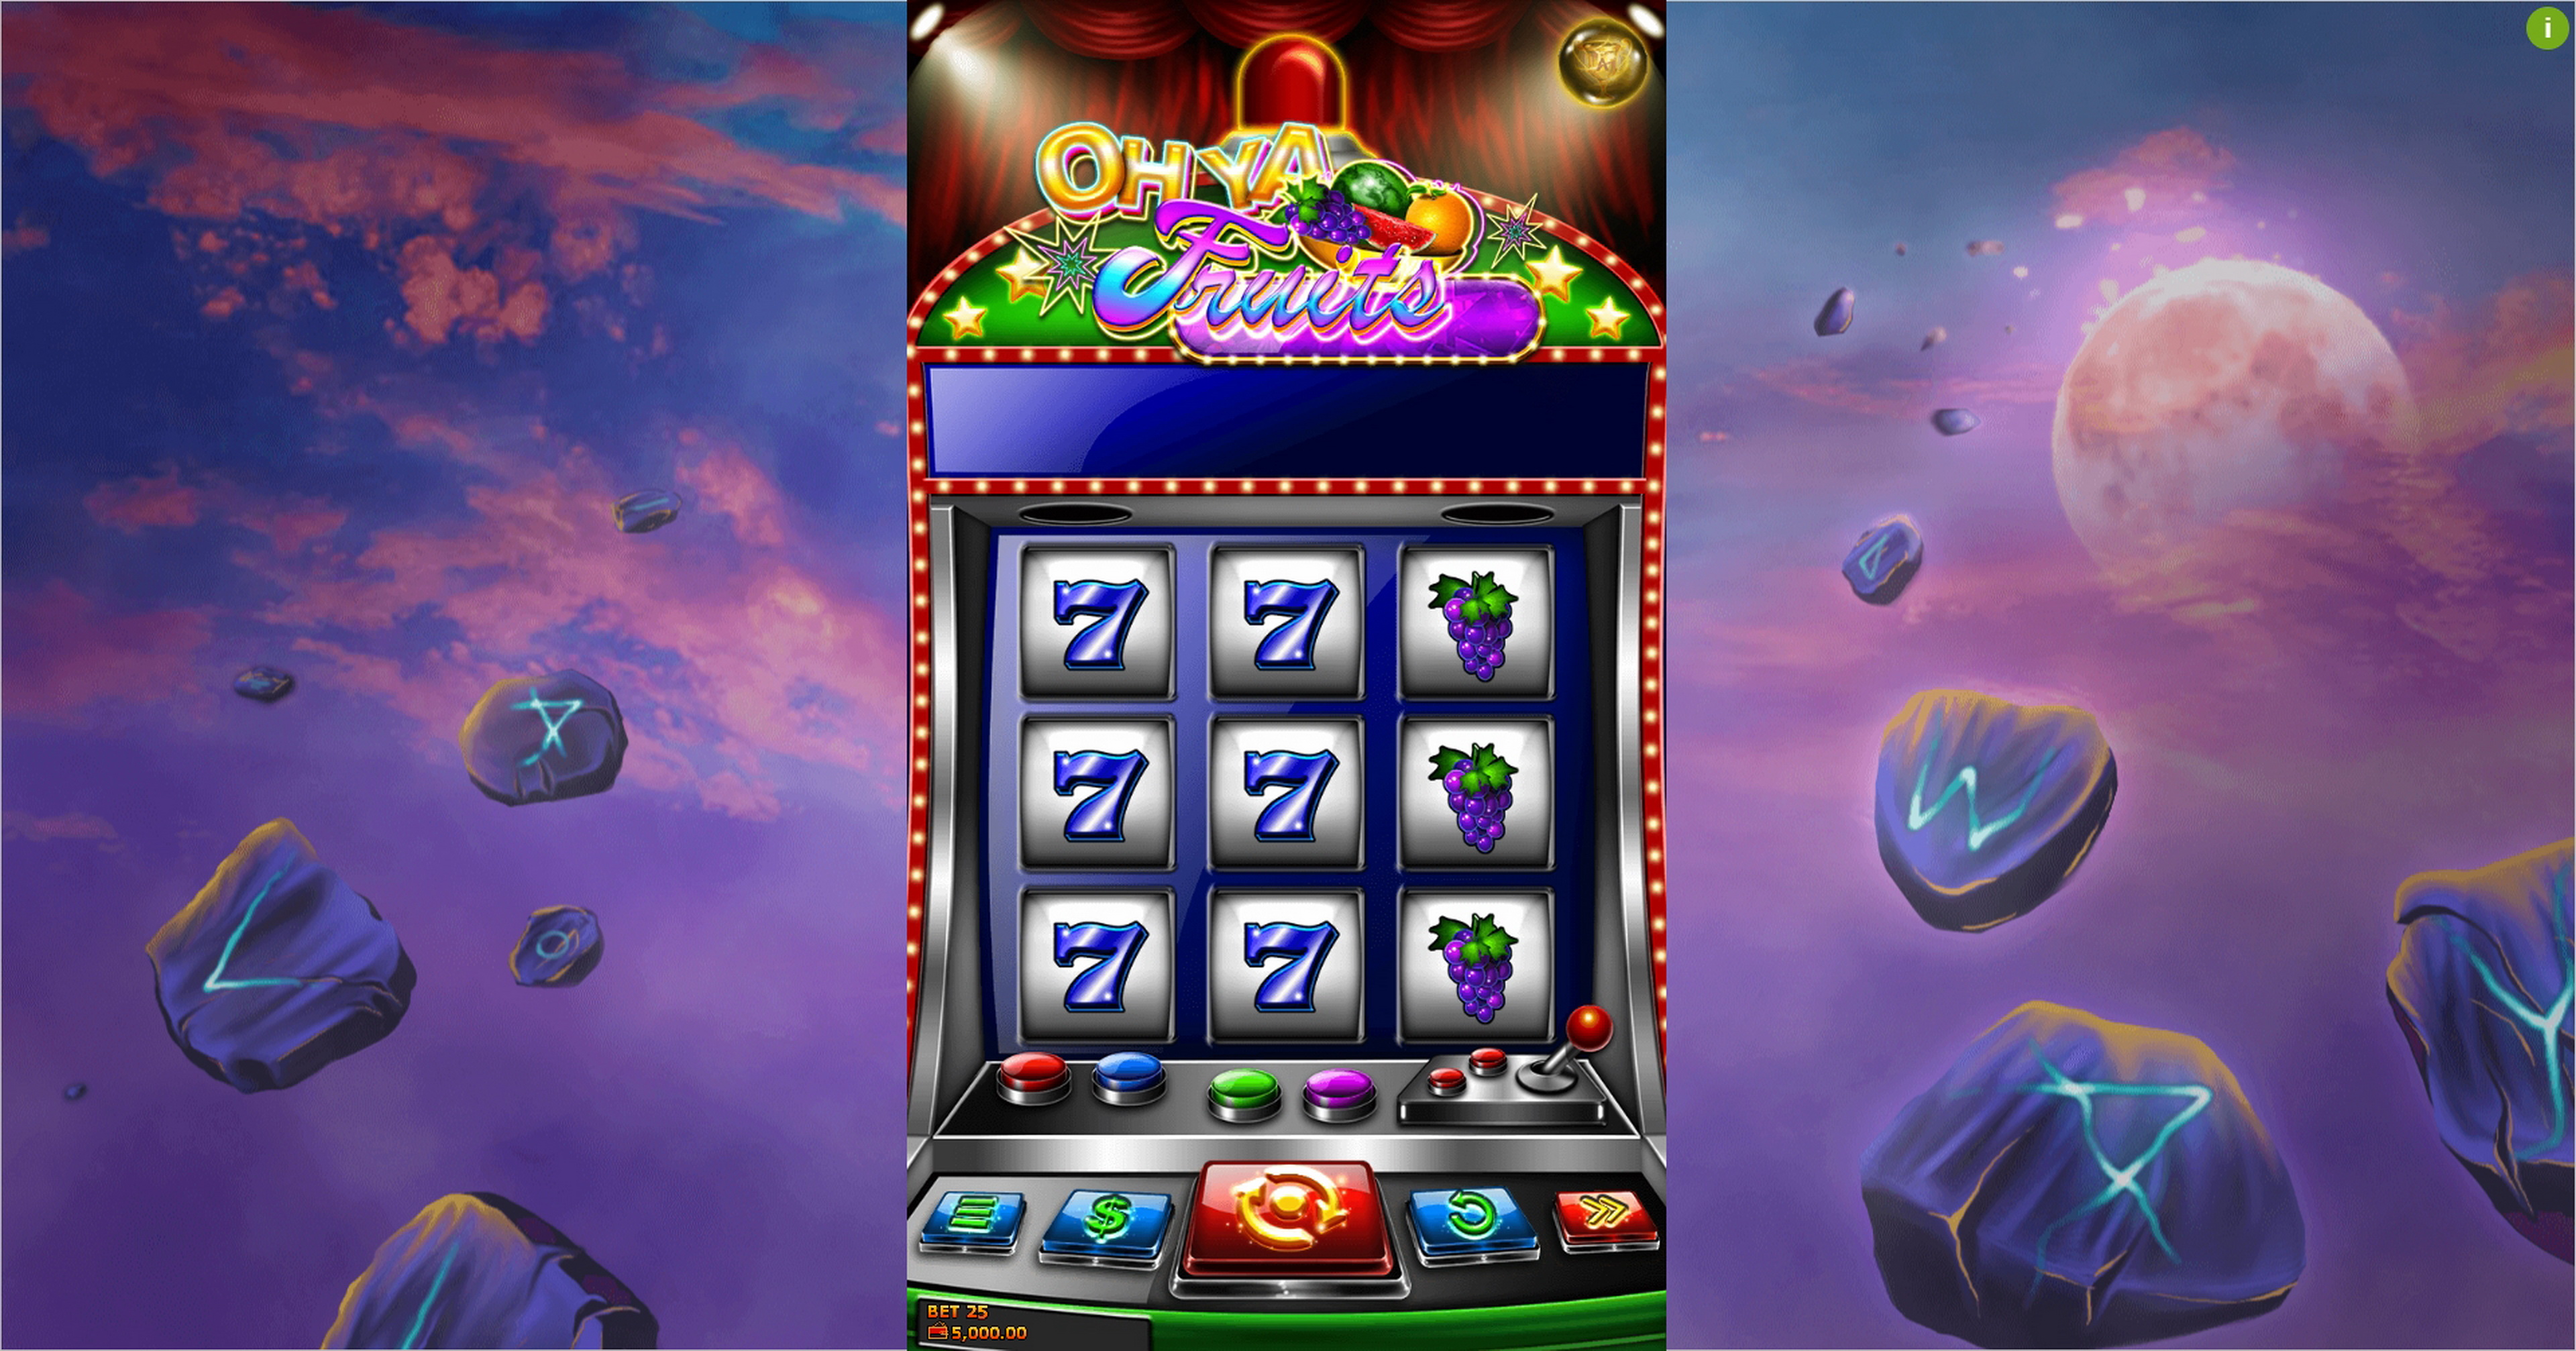 Reels in Ohya Fruits Slot Game by AllWaySpin